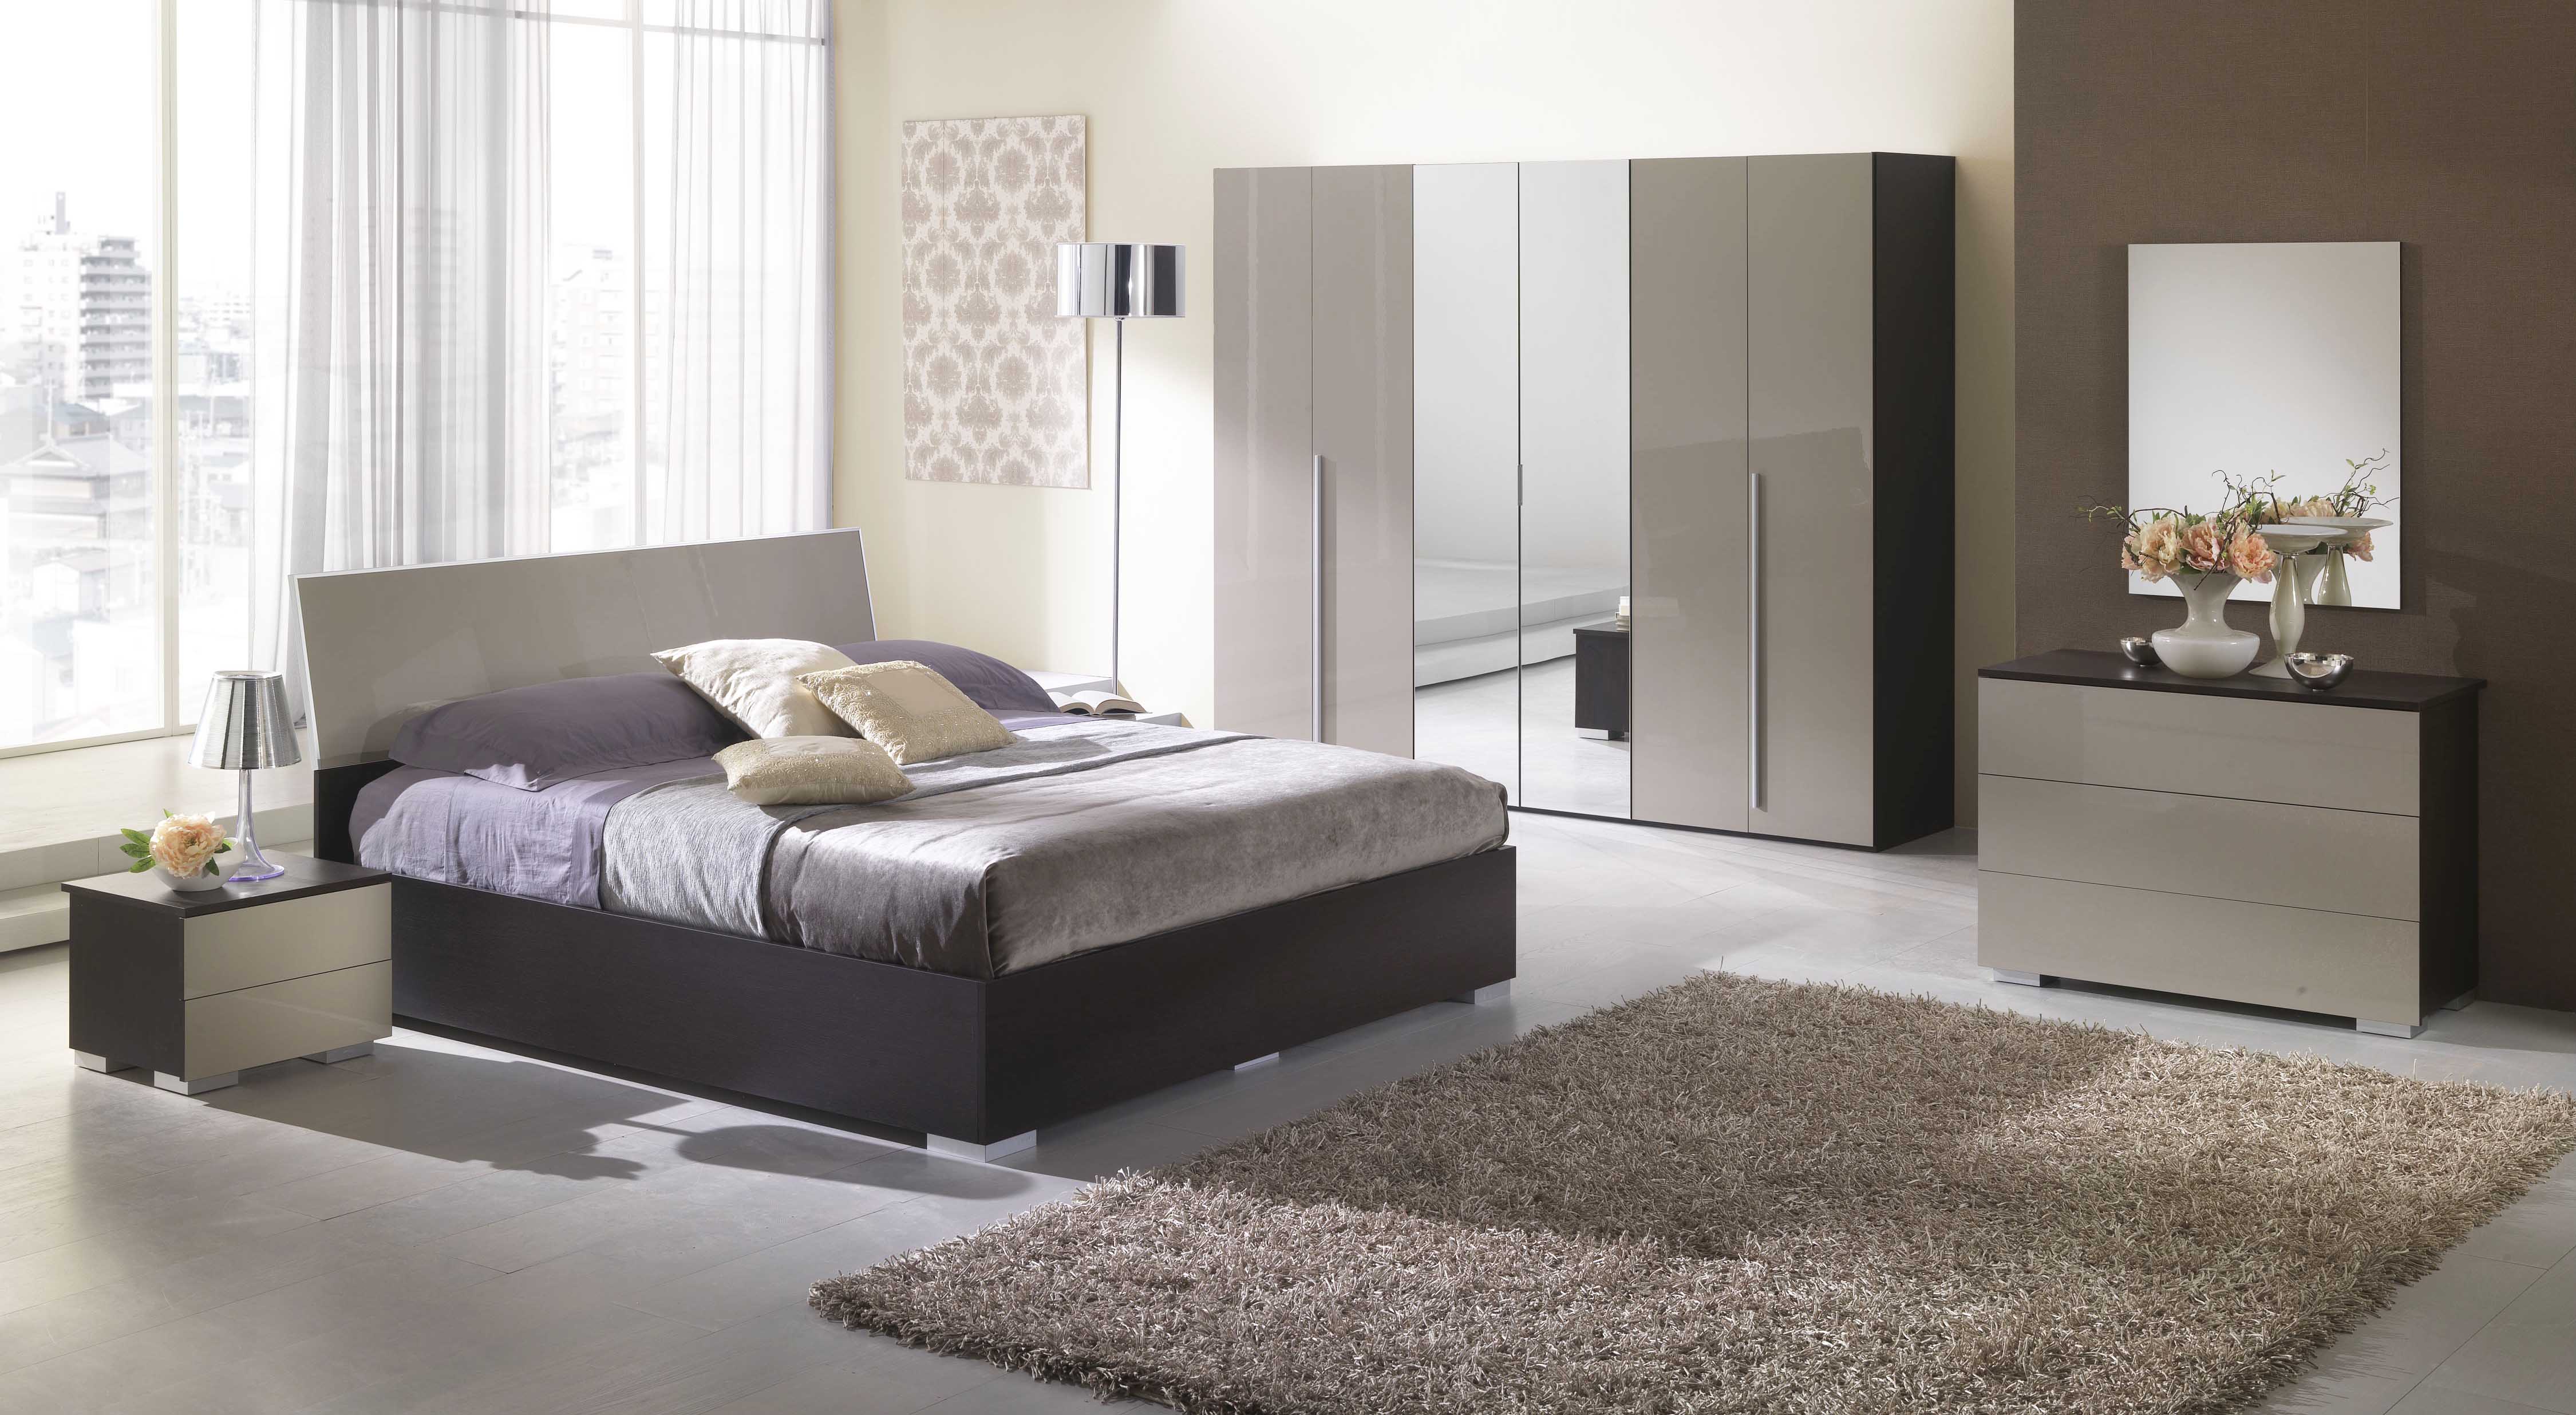 Grey bedroom furniture to fit your personality with best drawers, wood dresser table, and cheap wardrobe bedroom furniture sets picture ideas